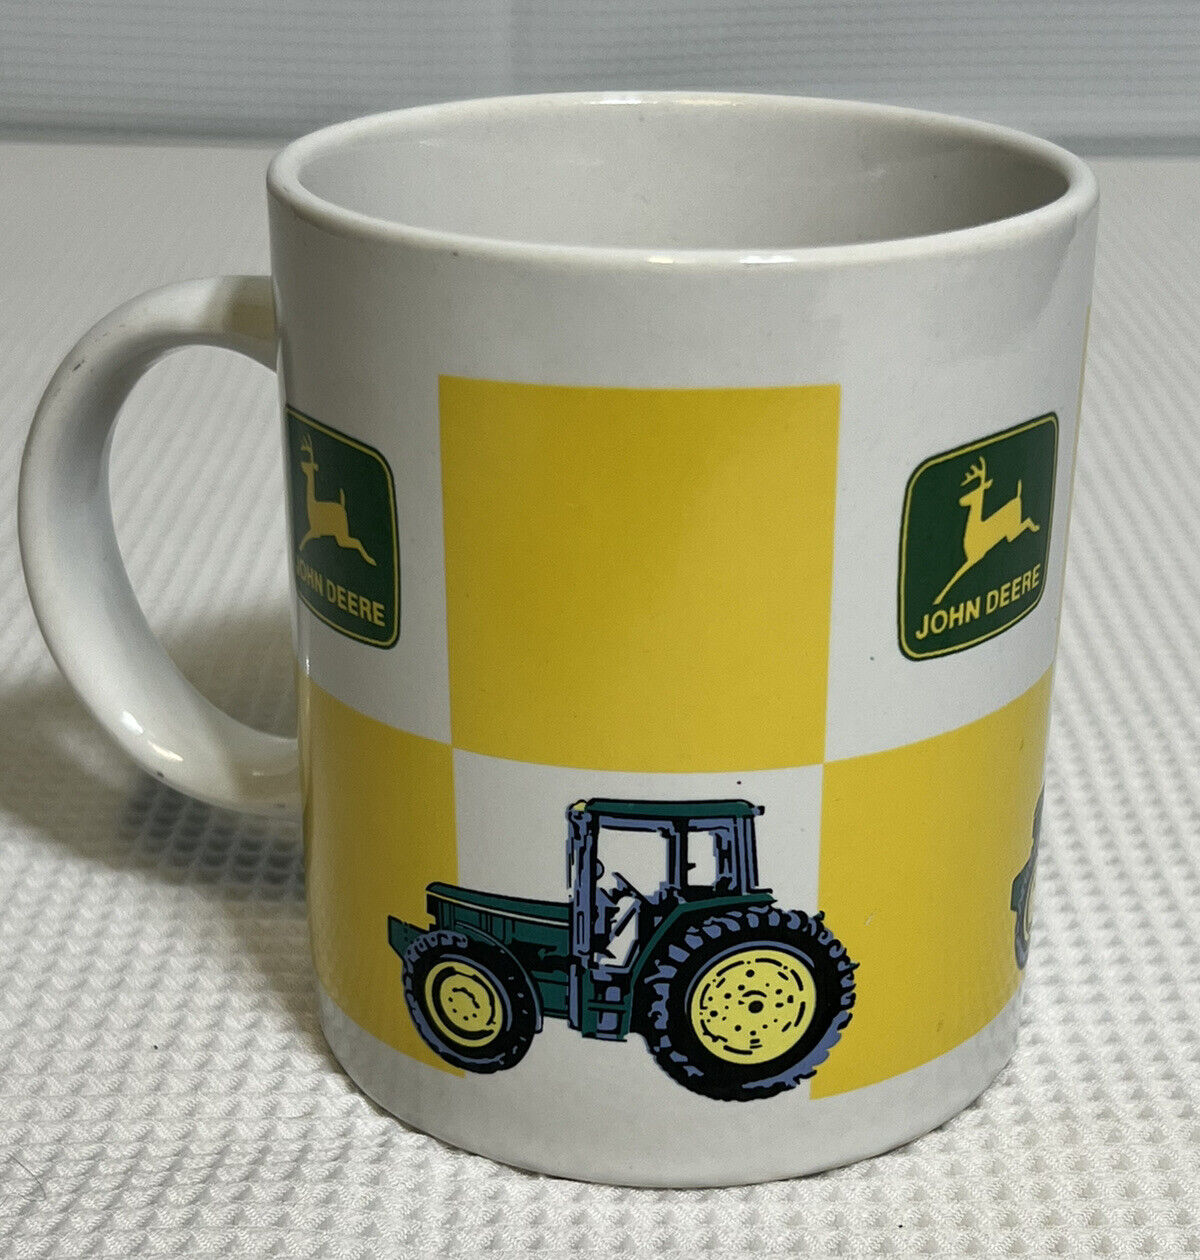 John Deere Gibson Coffee Mug Officially Licensed Ceramic Tractor Cup